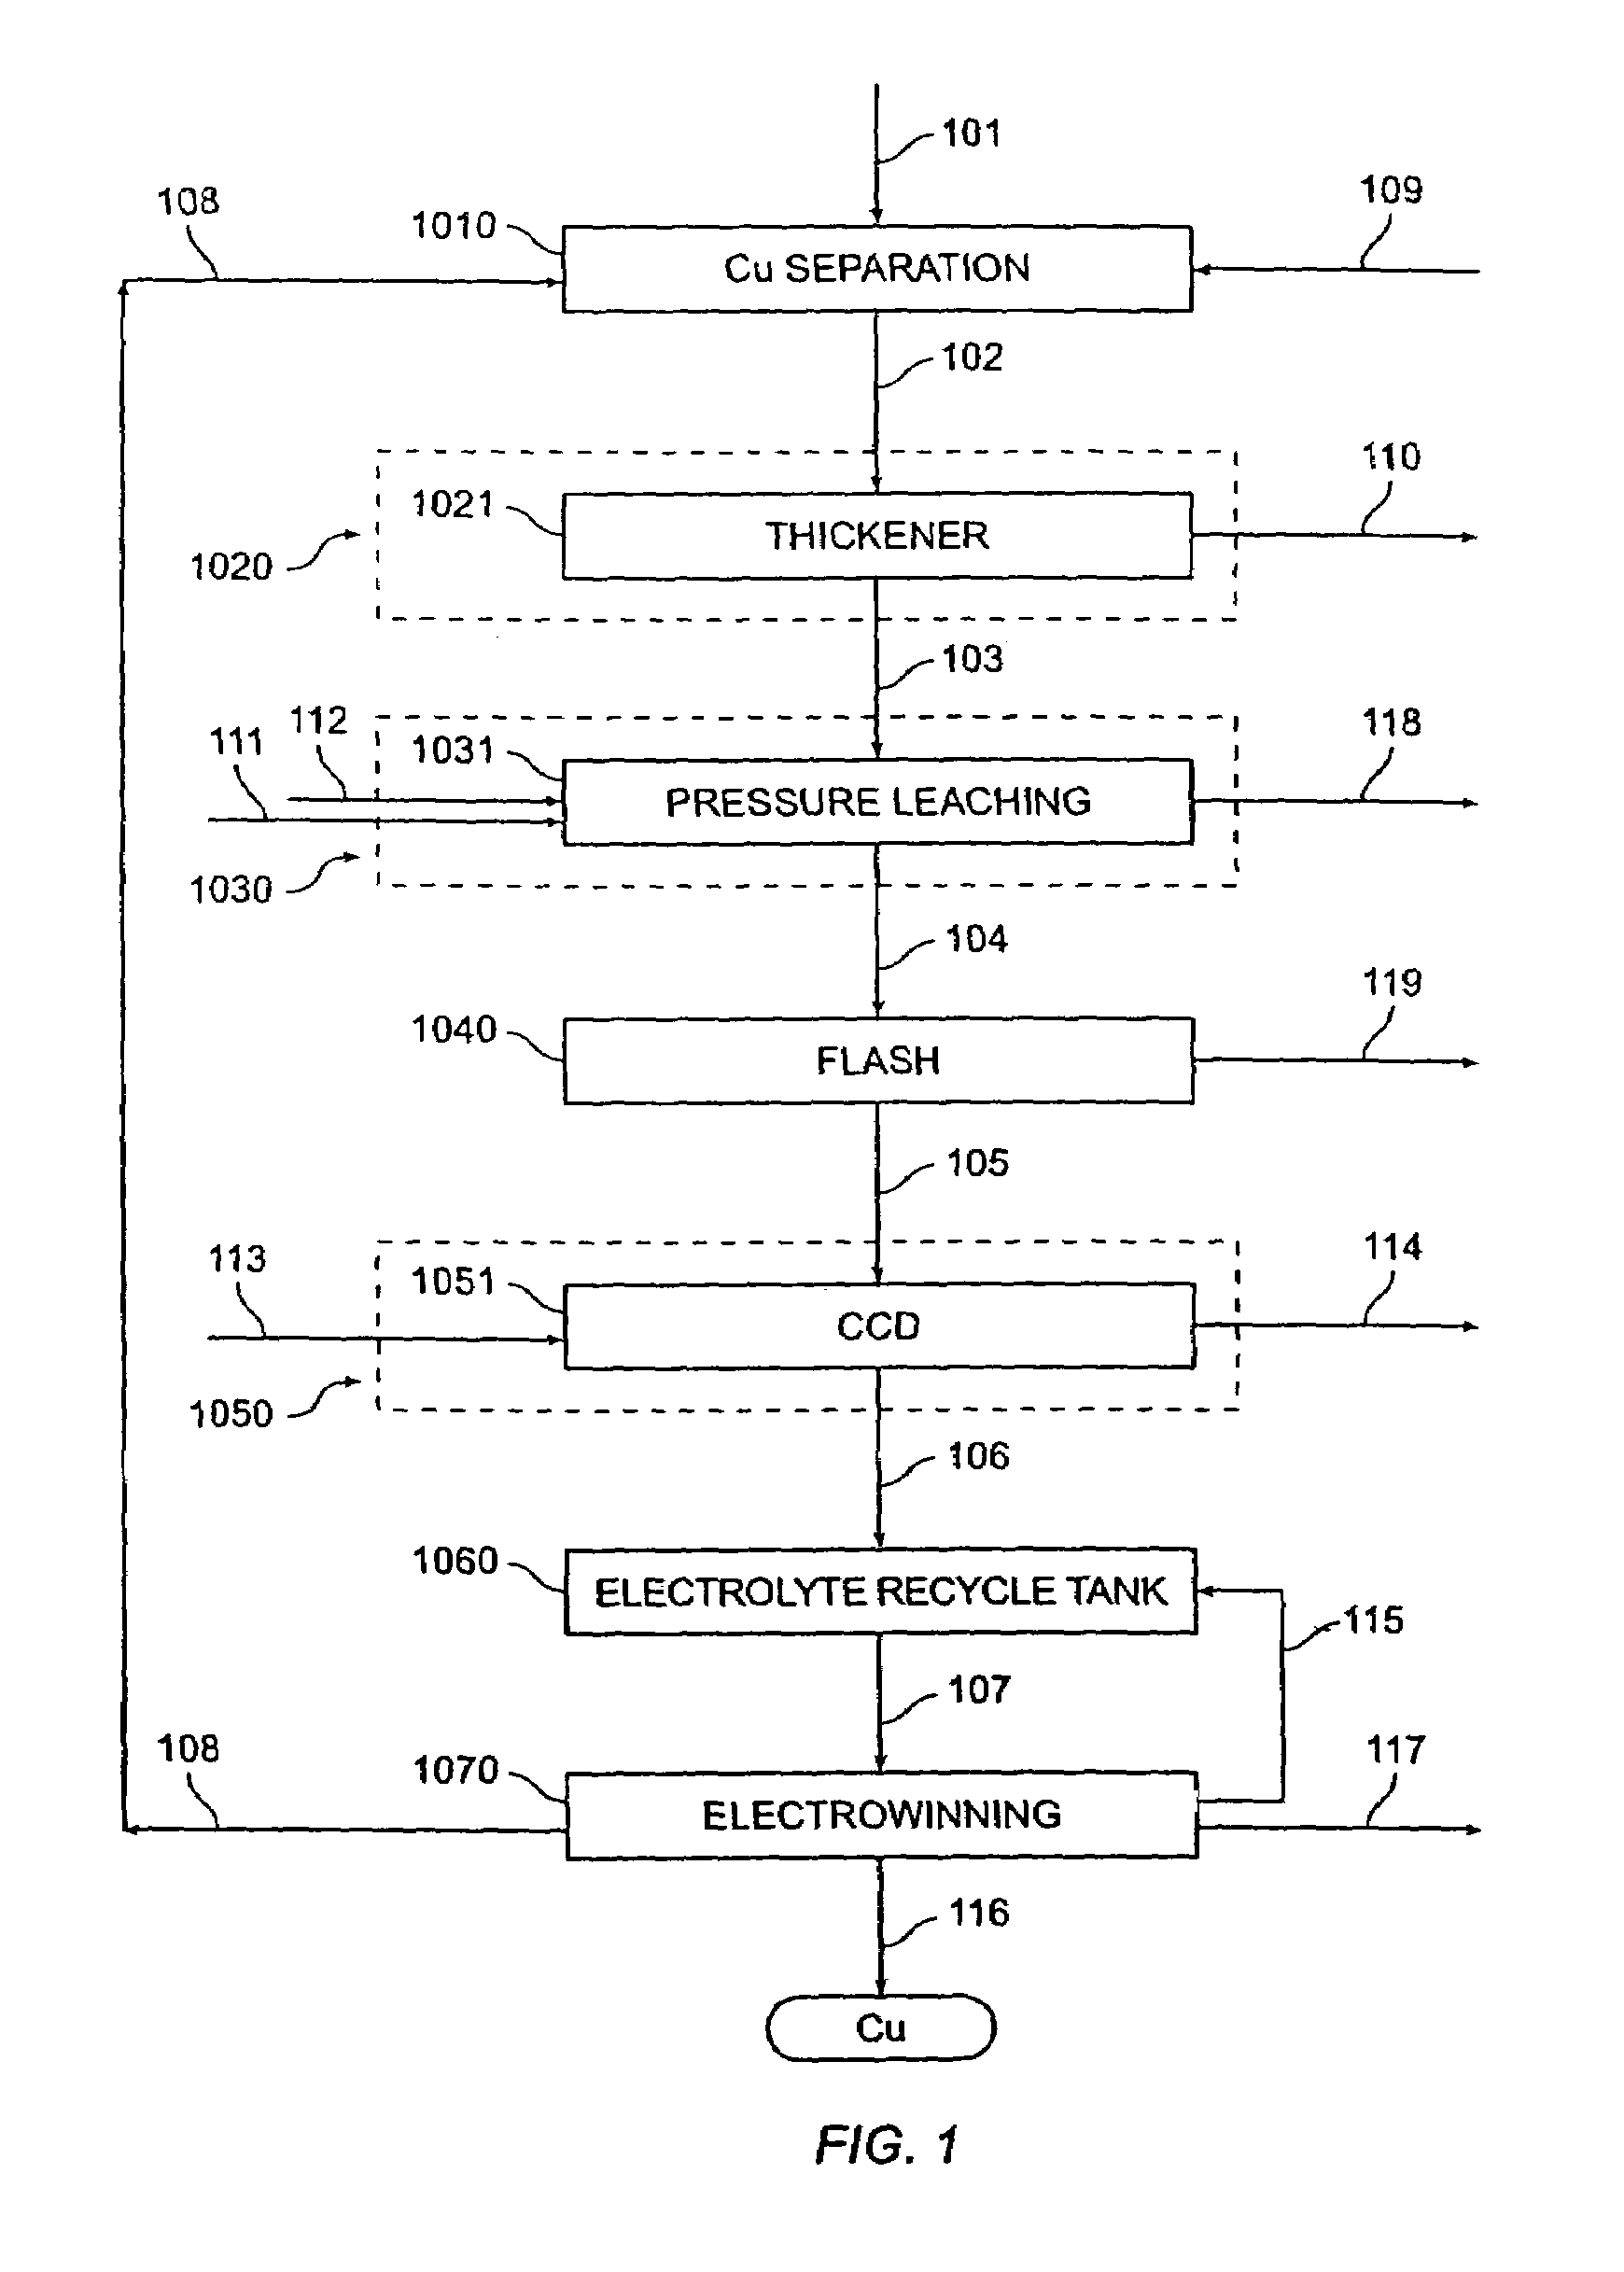 System for direct electrowinning of copper